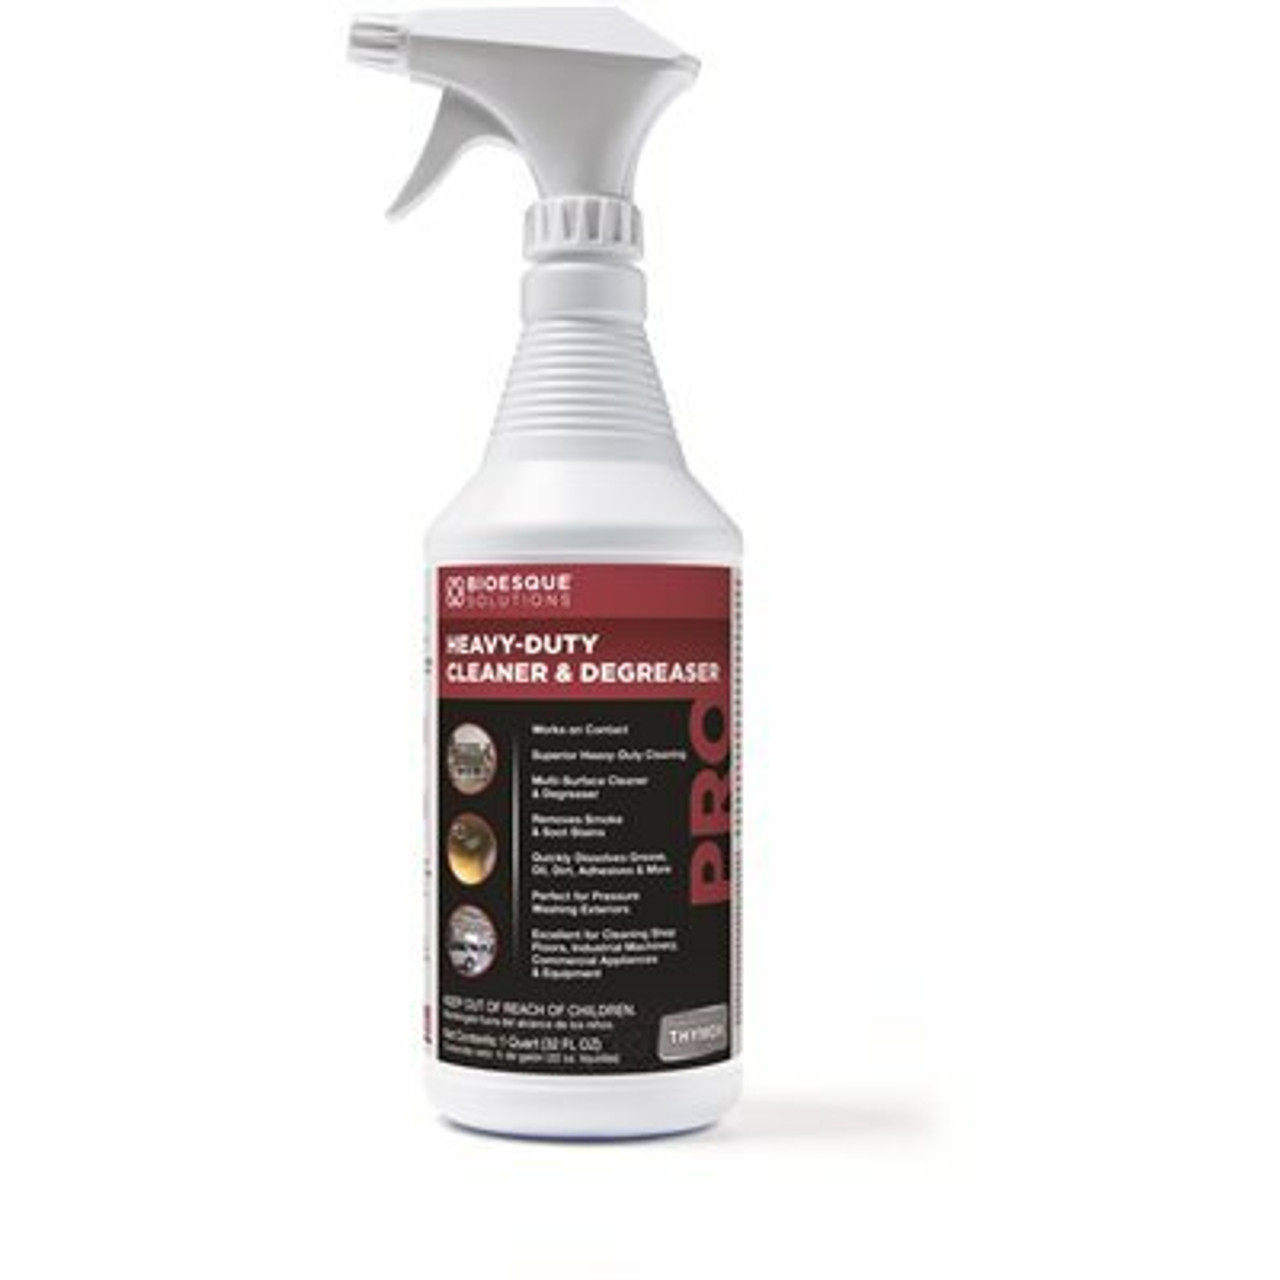 Bioesque 1 Qt. Heavy-Duty Cleaner And Degreaser